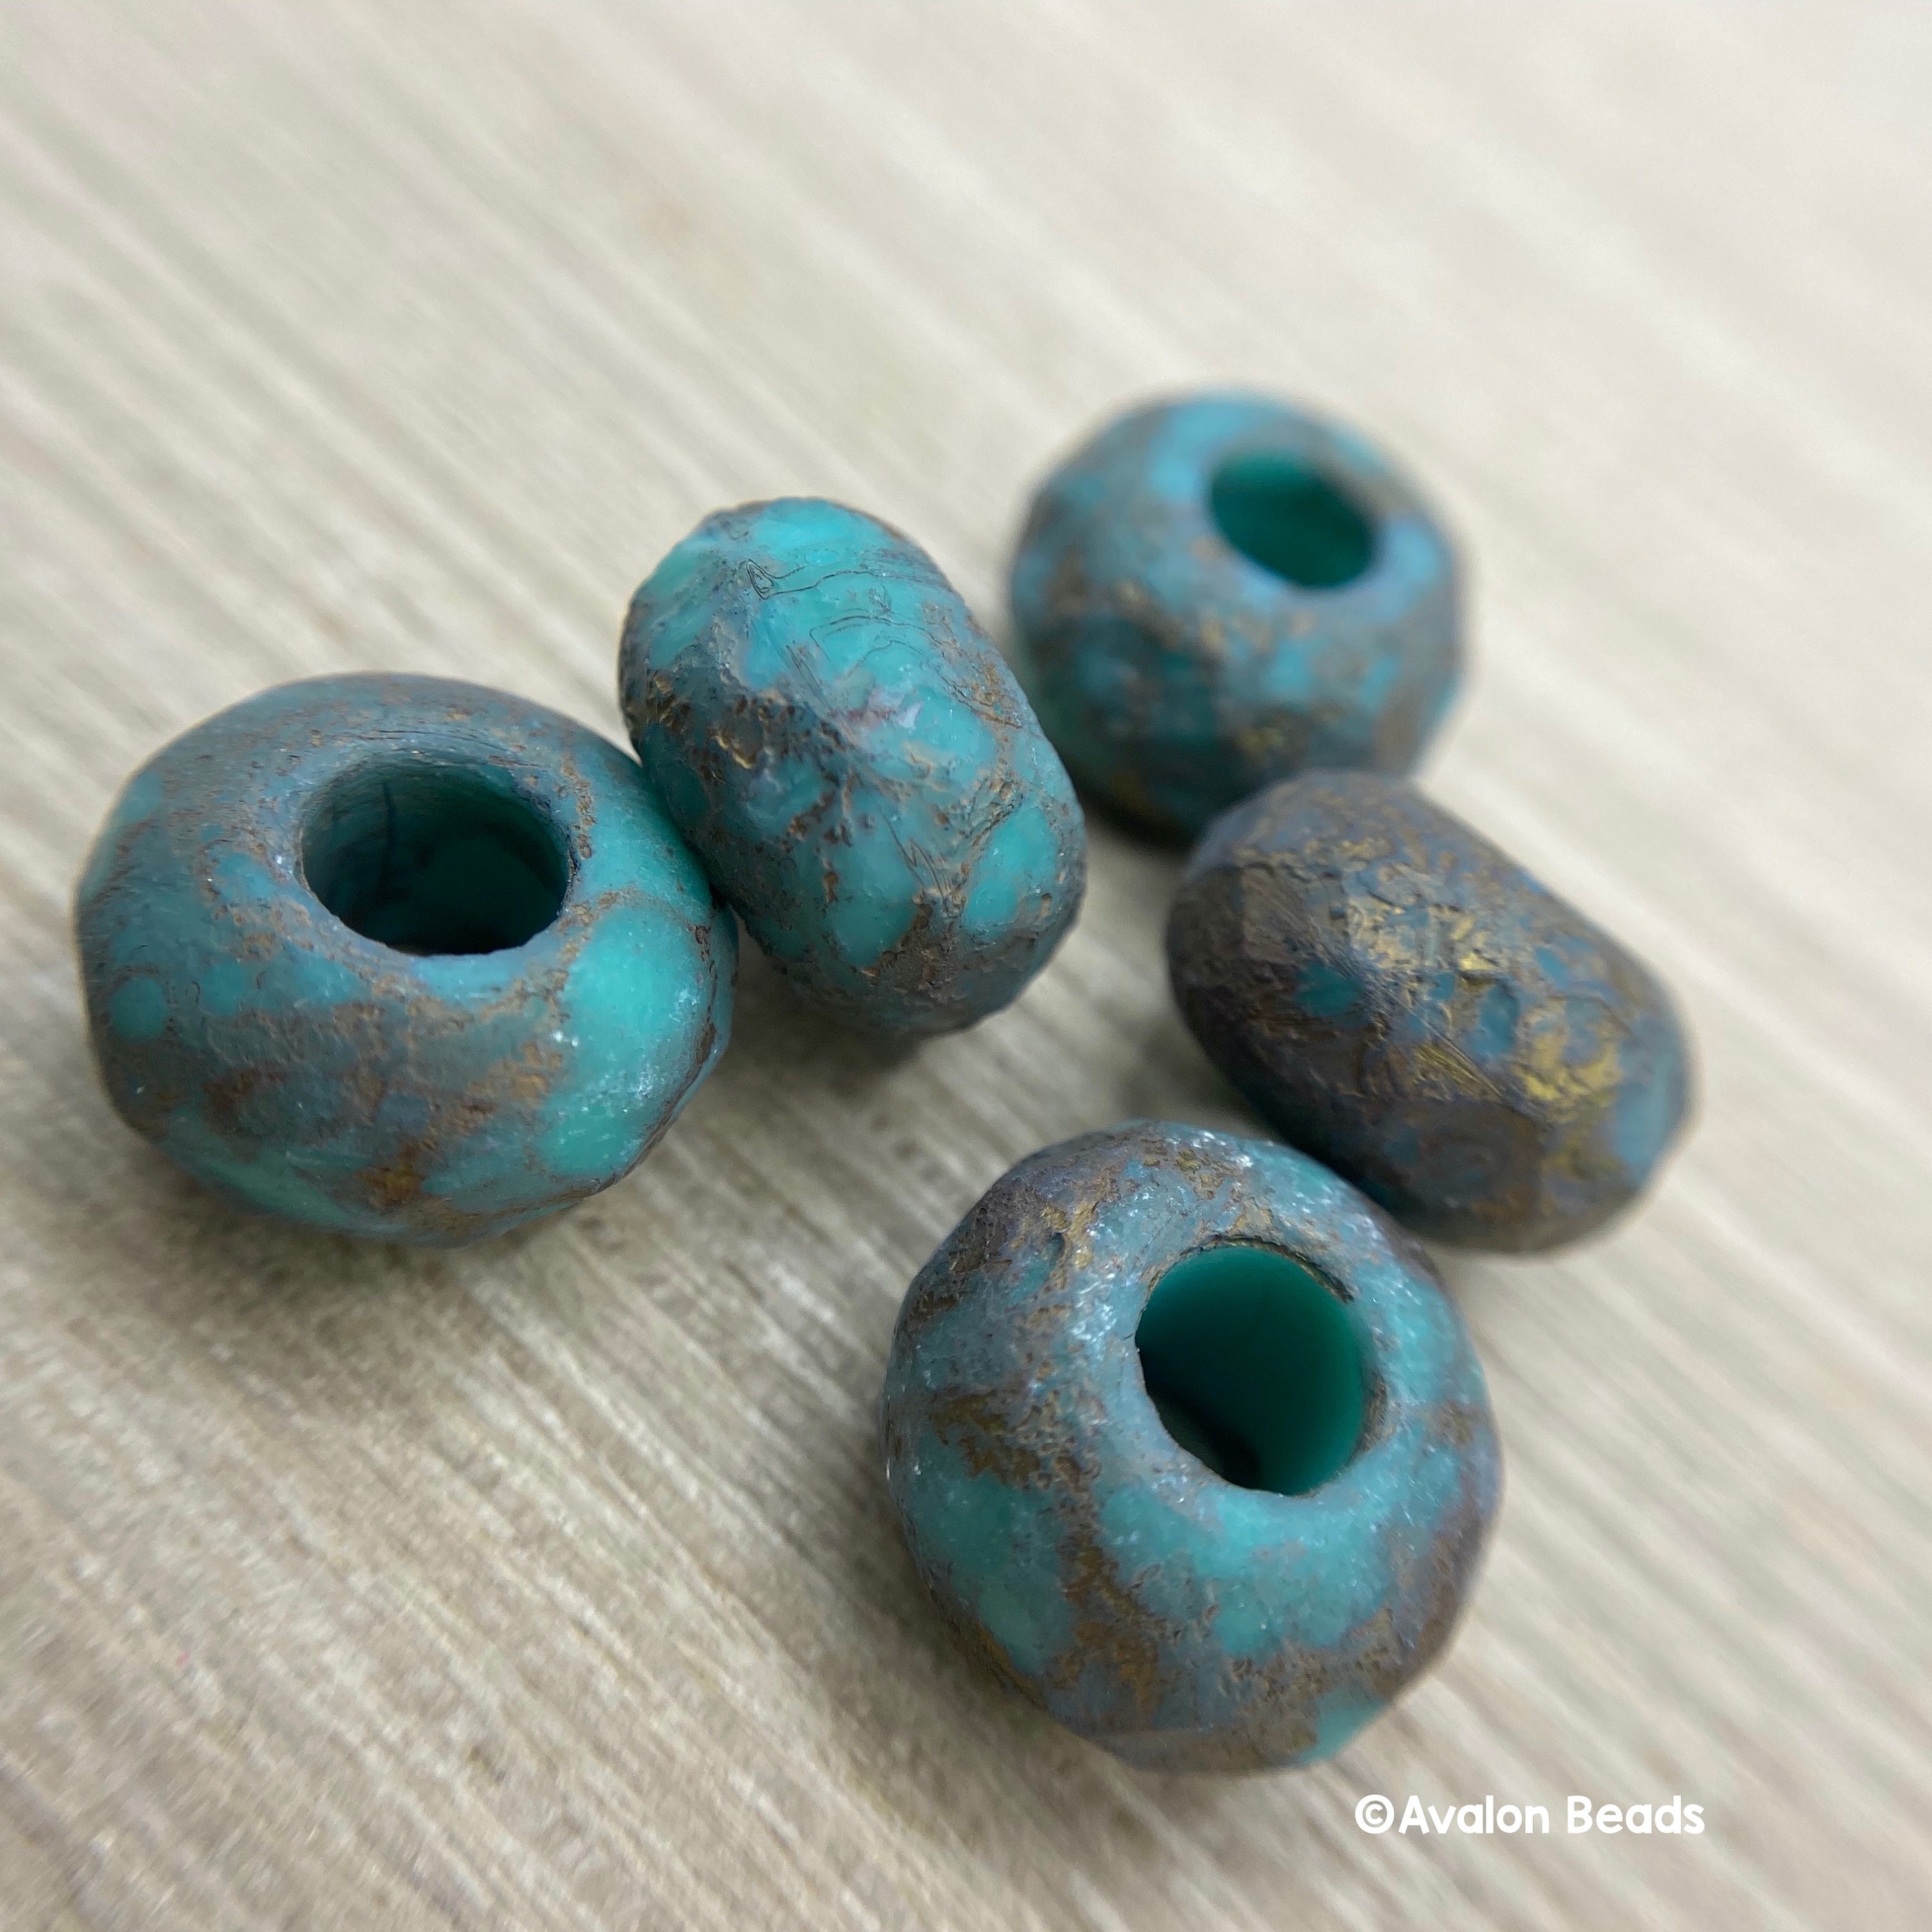 Large Hole Glass Beads, 8mm X 12mm Rondelle Roller With 5mm Hole, Turquoise  Blue & Charcoal, 5 Pieces 